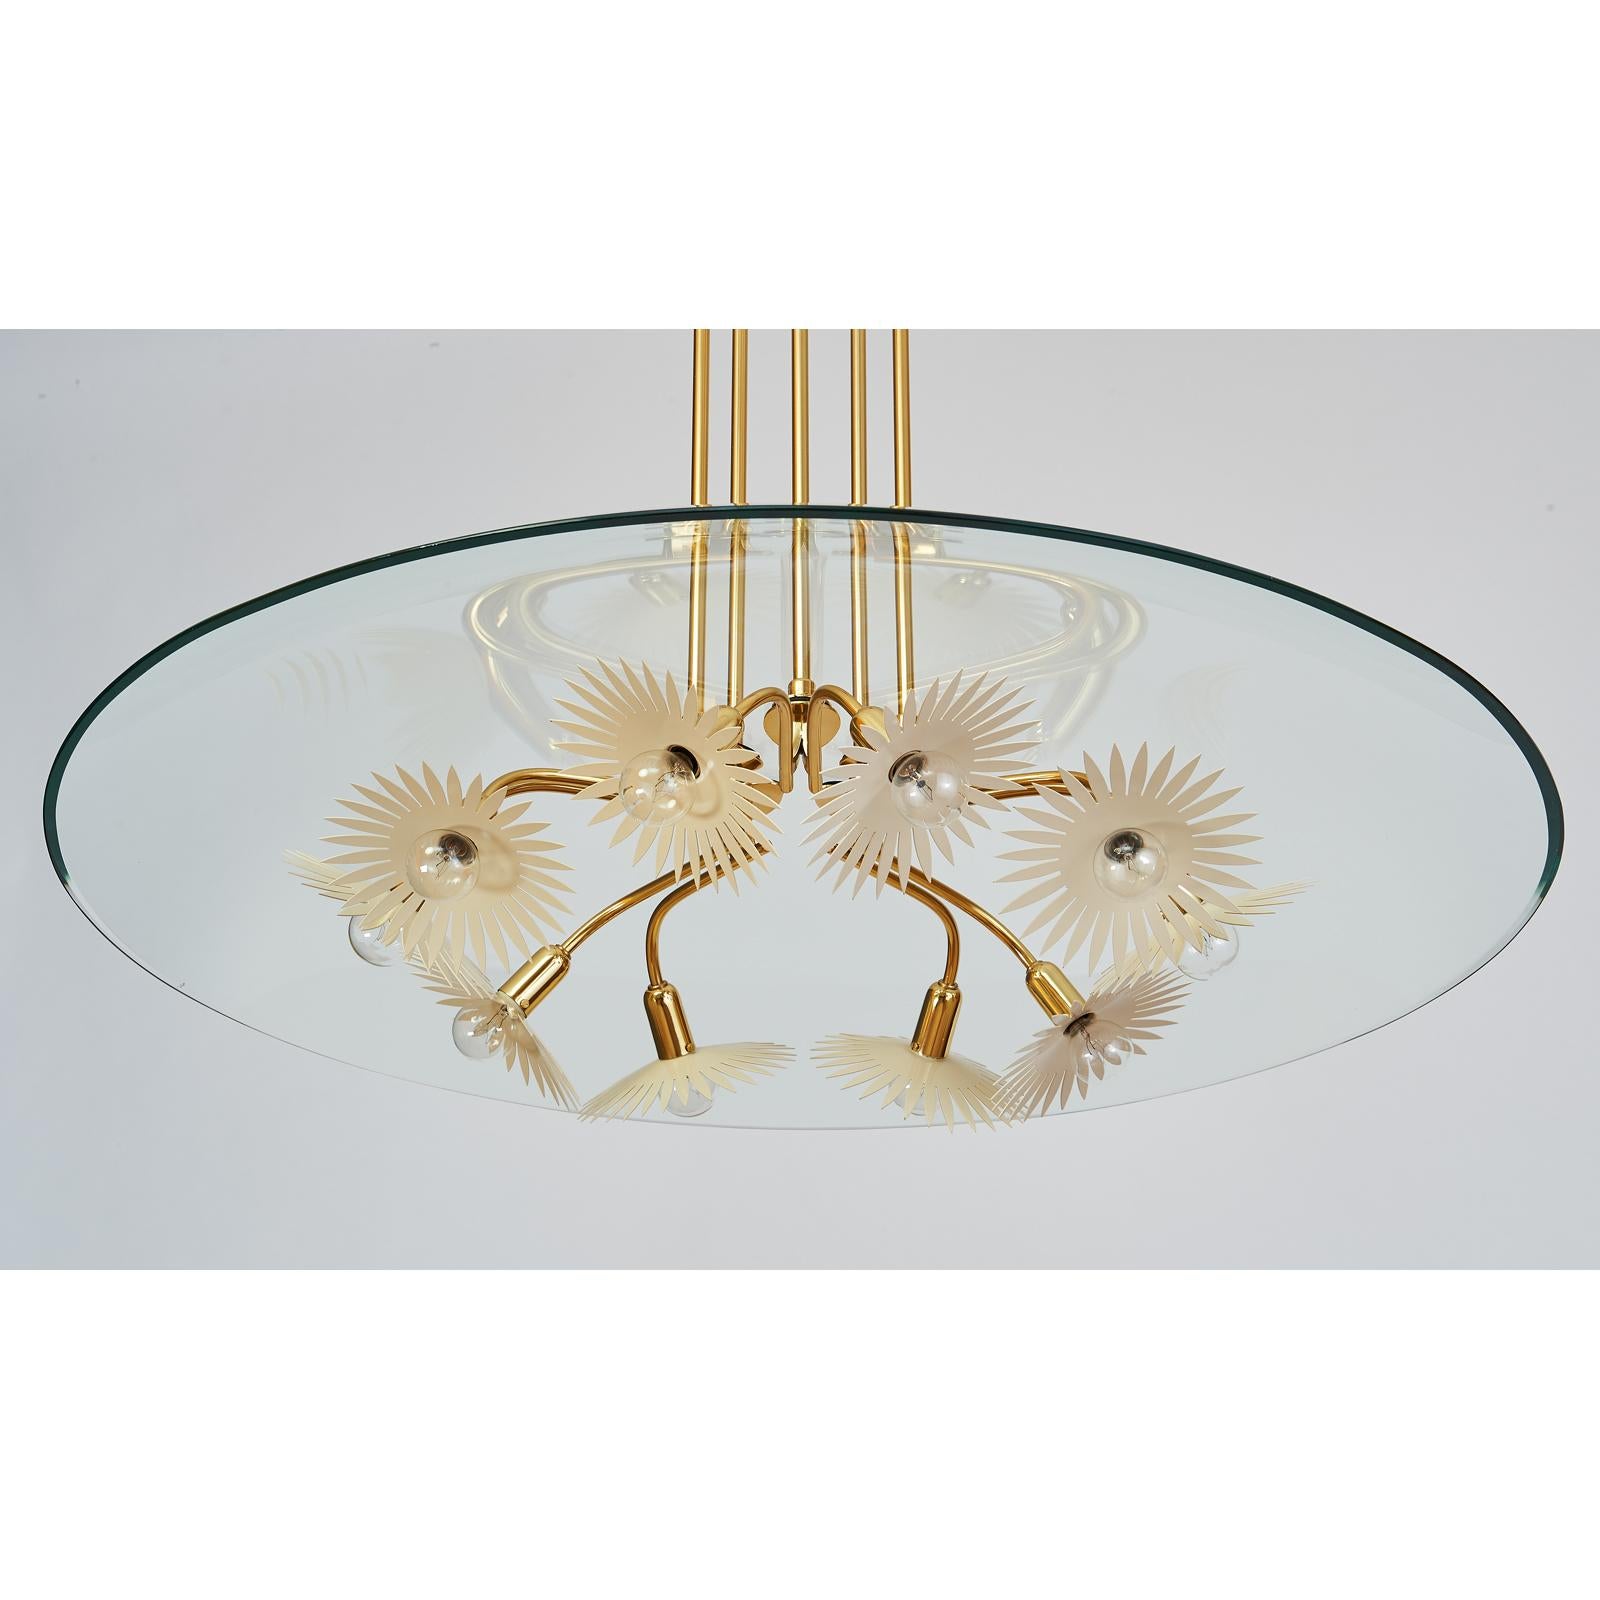 Pietro Chiesa (1892-1948) for Fontana Arte
A magnificent ten branch chandelier in polished brass with clear glass dome and enameled decoration.
Italy, 1940s stamped with maker's mark
Dimensions: 33 Diameter x 43 H
Rewired for use in the USA with